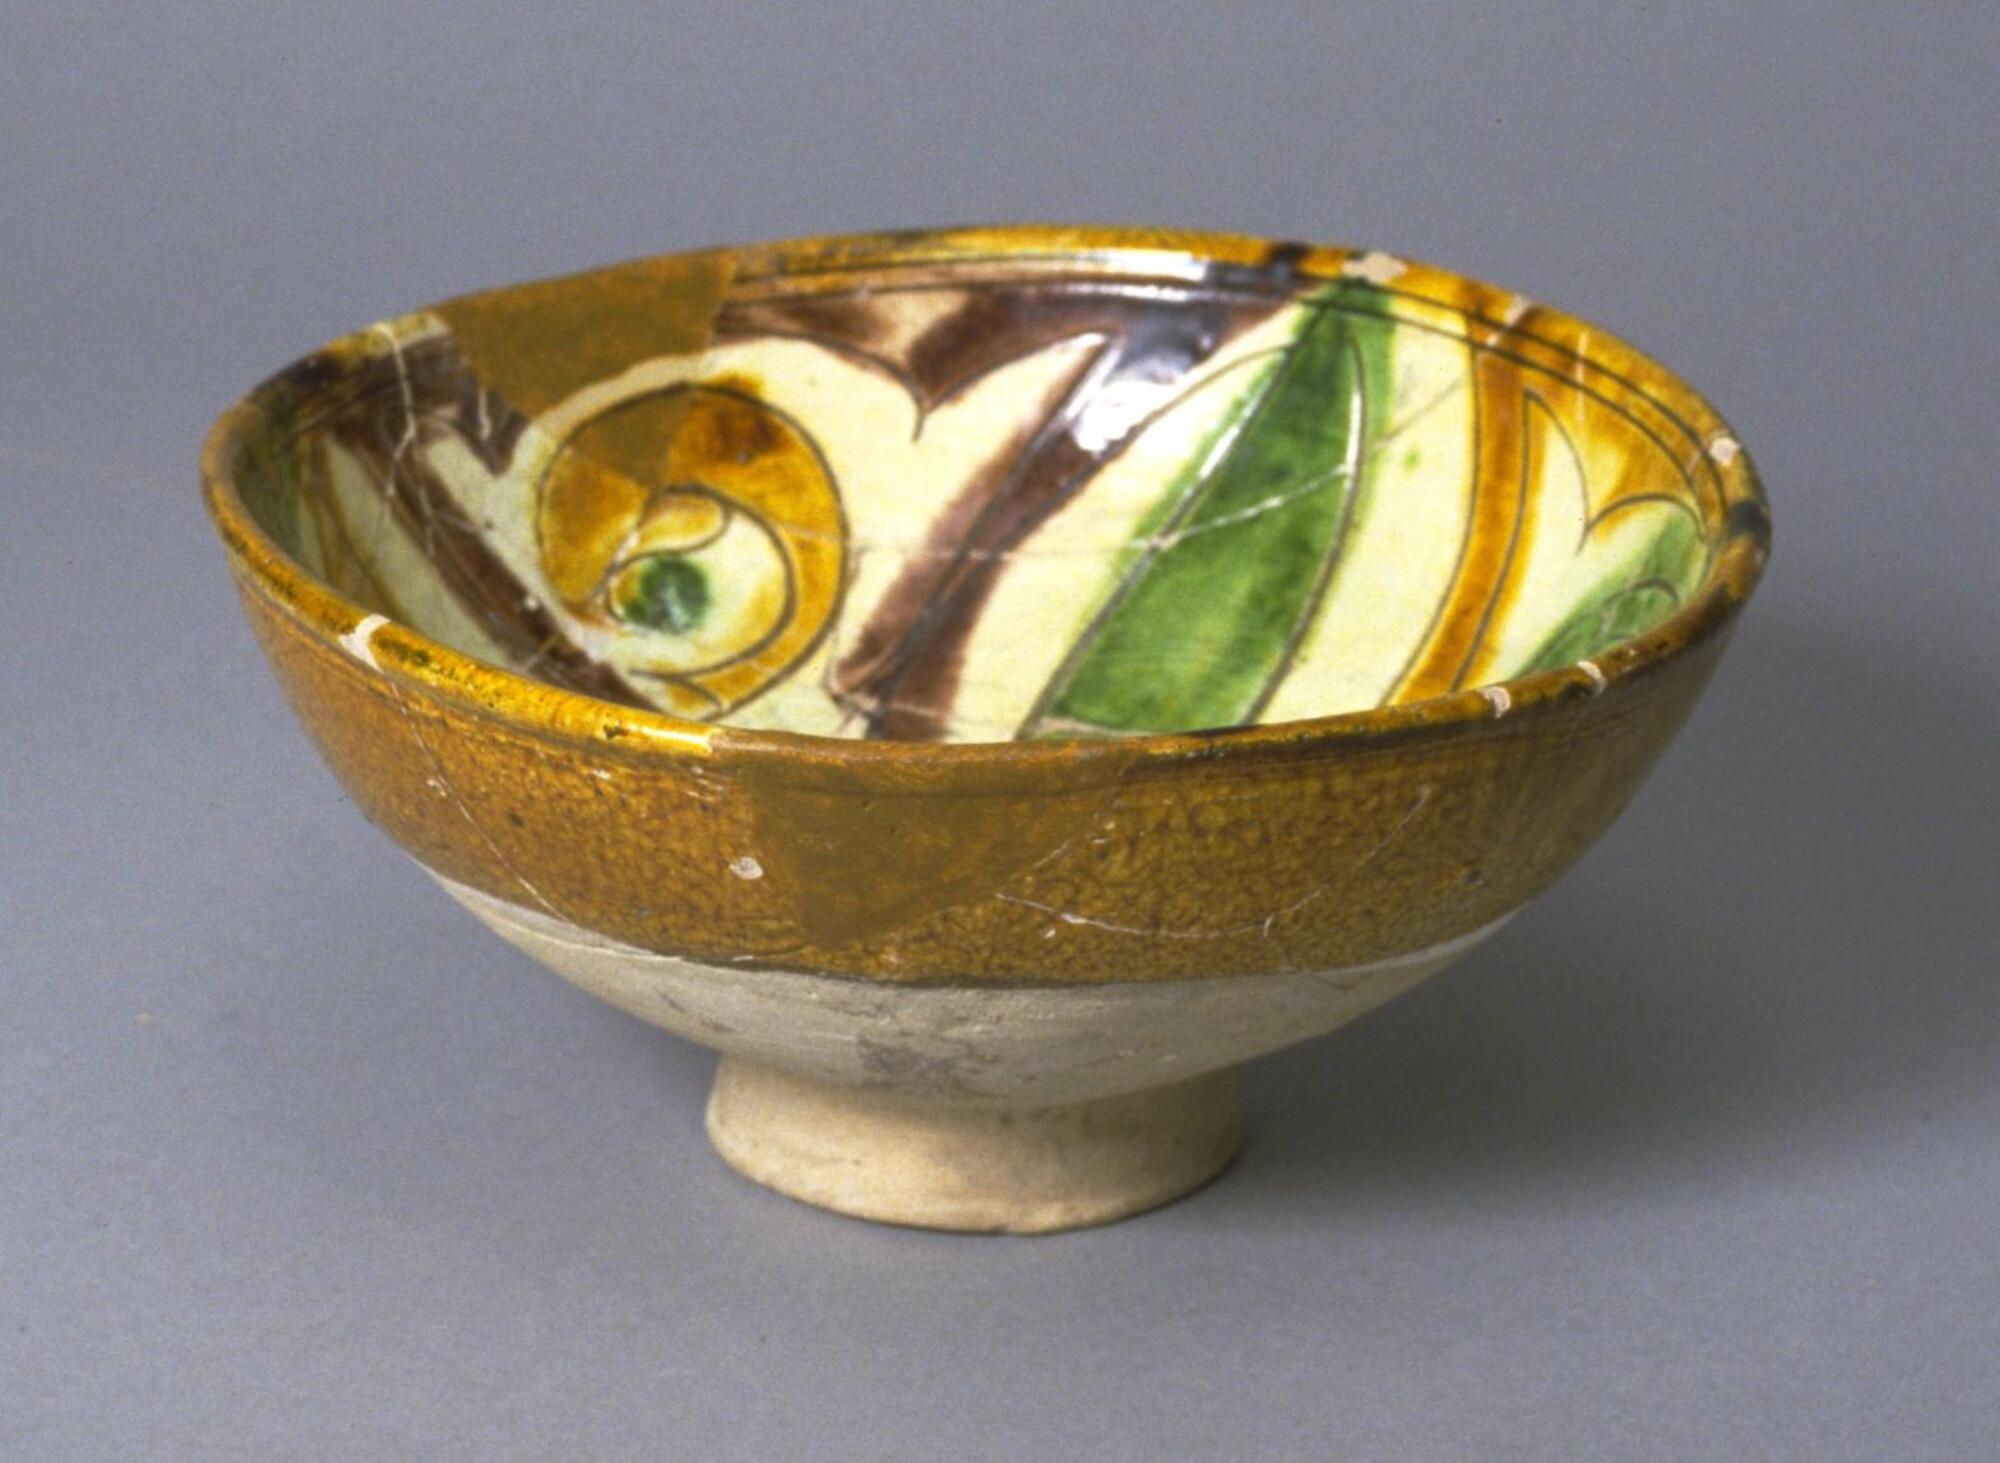 "In these vessels pigments were applied within the lines of a pattern incised into the slip, and then the interior was covered with a colorless glaze and the exterior with a yellow-brown one." (pg. 38)